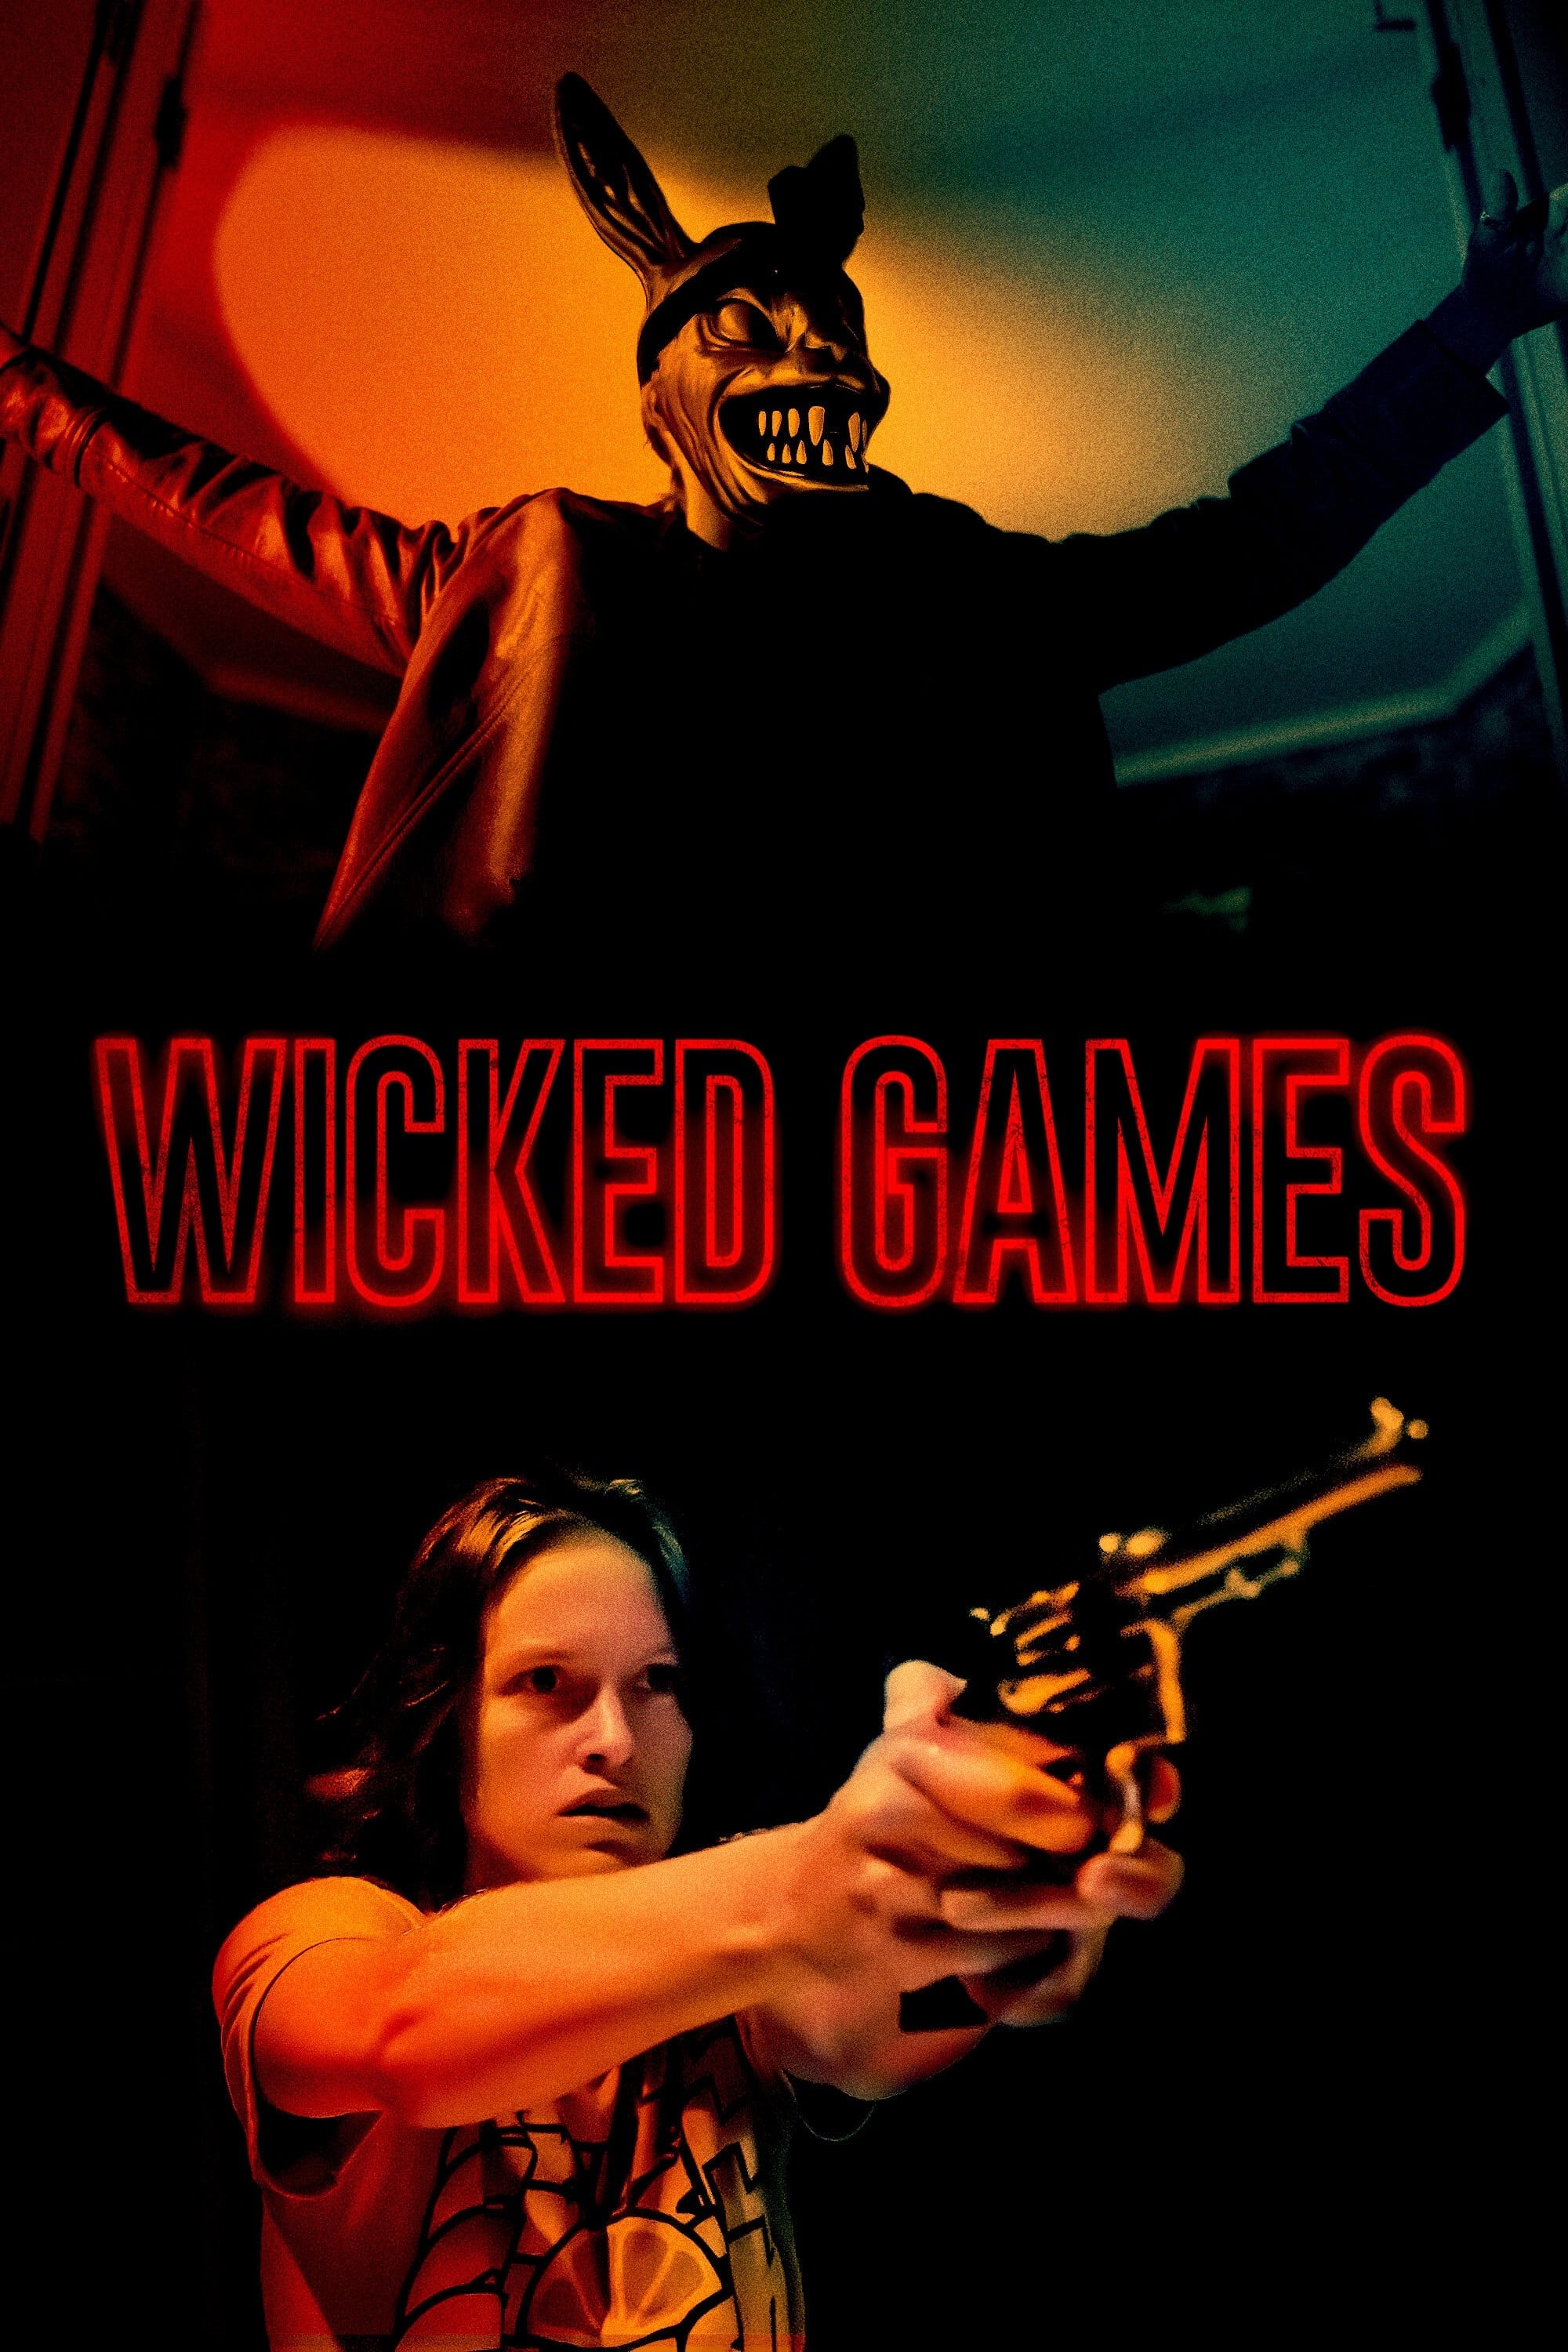 Wicked Games film